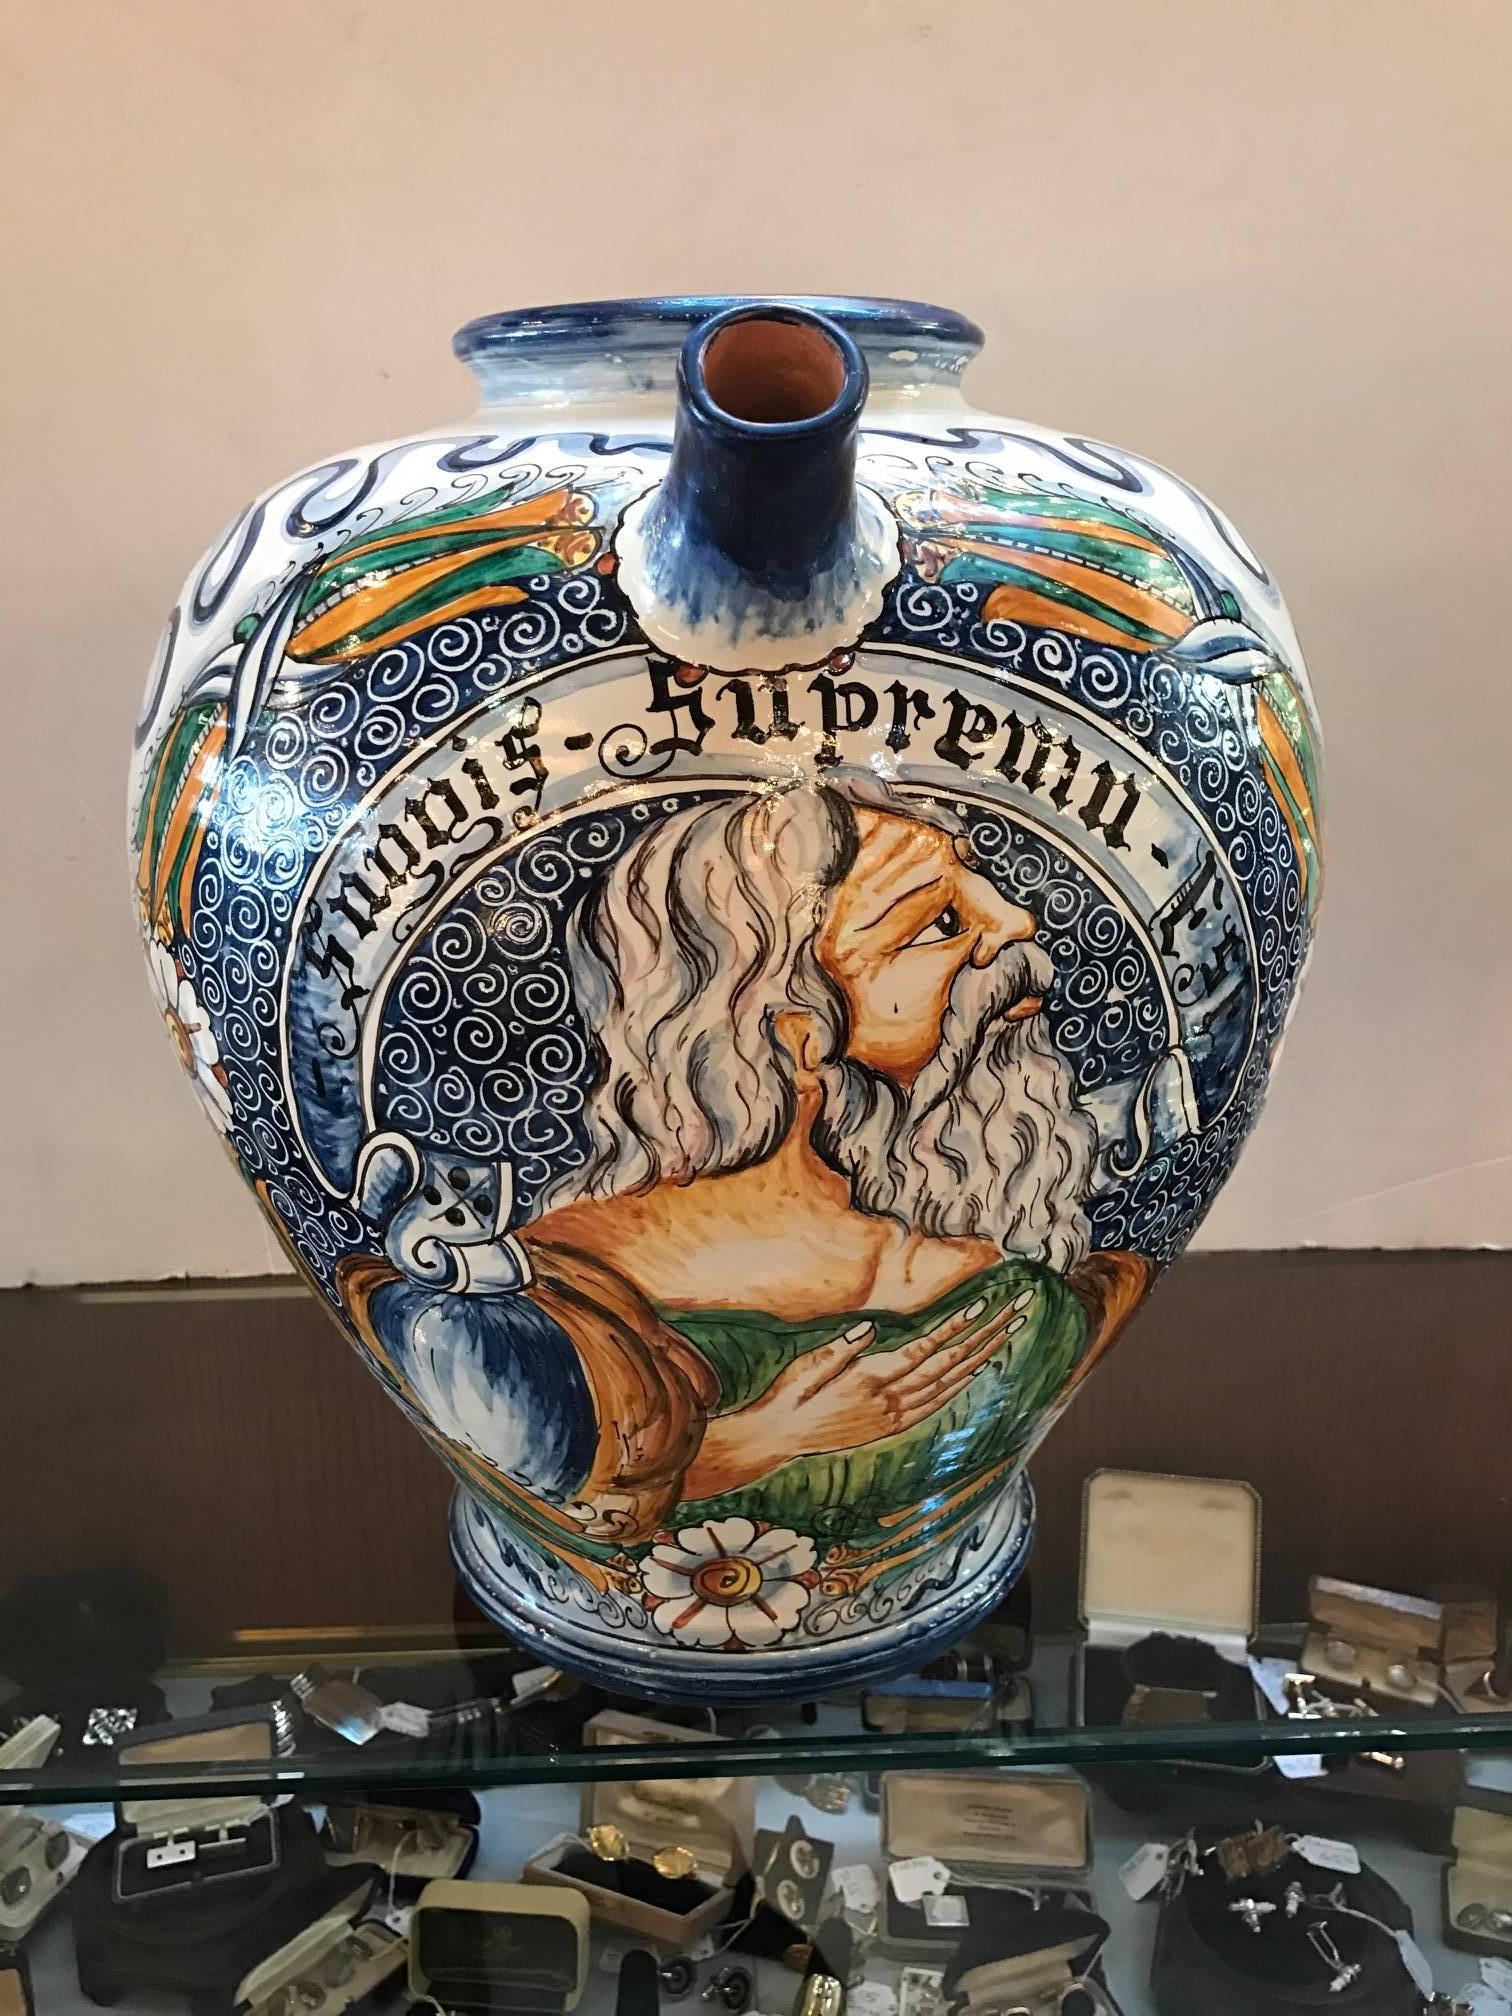 Large and vibrantly hand-painted Italian faience wine jug. The bulbous body with upper spout and nicely detailed handle.